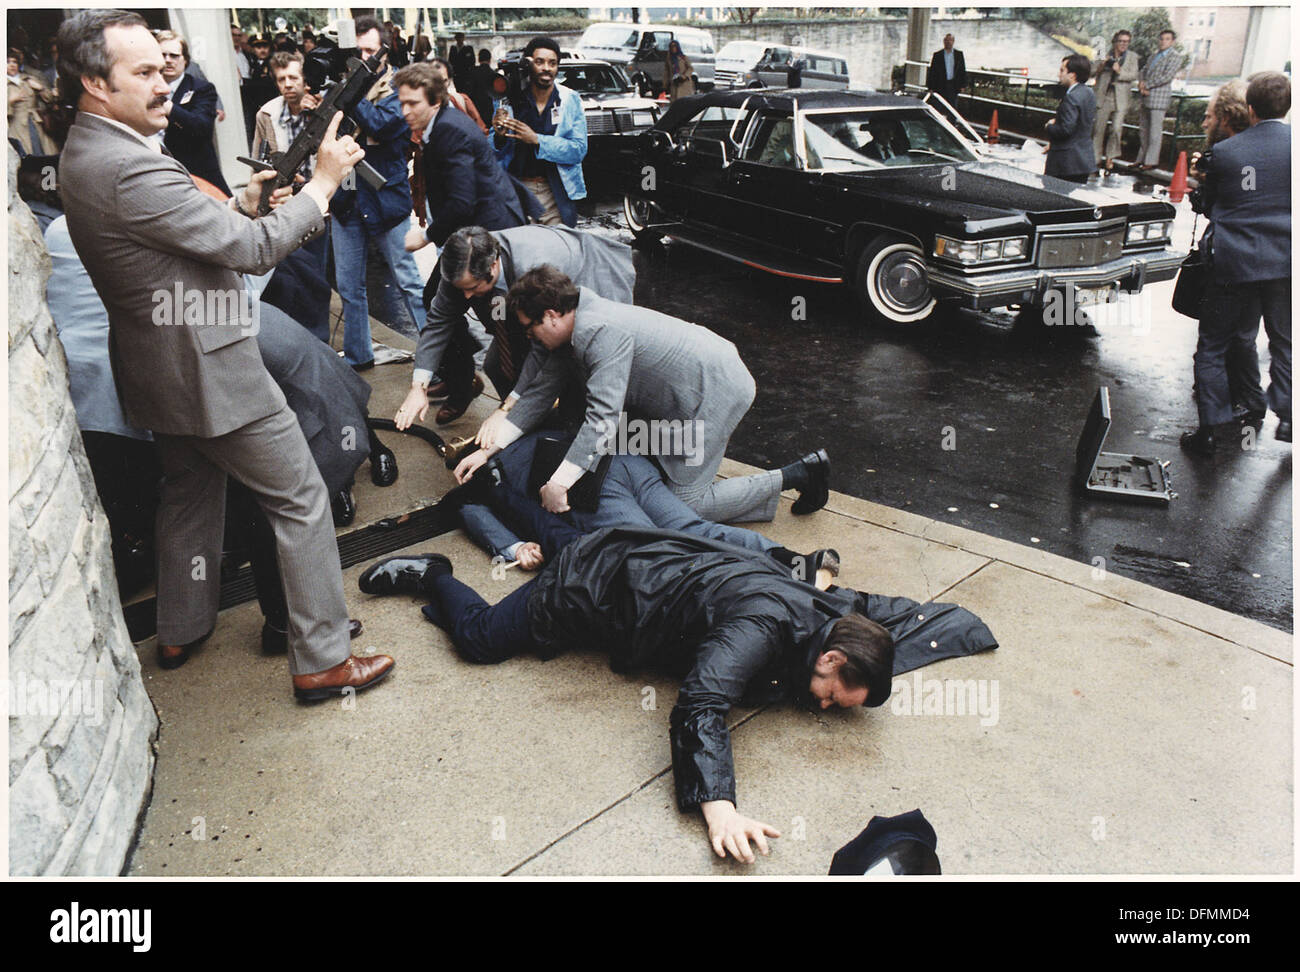 Photograph of chaos outside the Washington Hilton Hotel after the assassination attempt on President Reagan 198514 Stock Photo